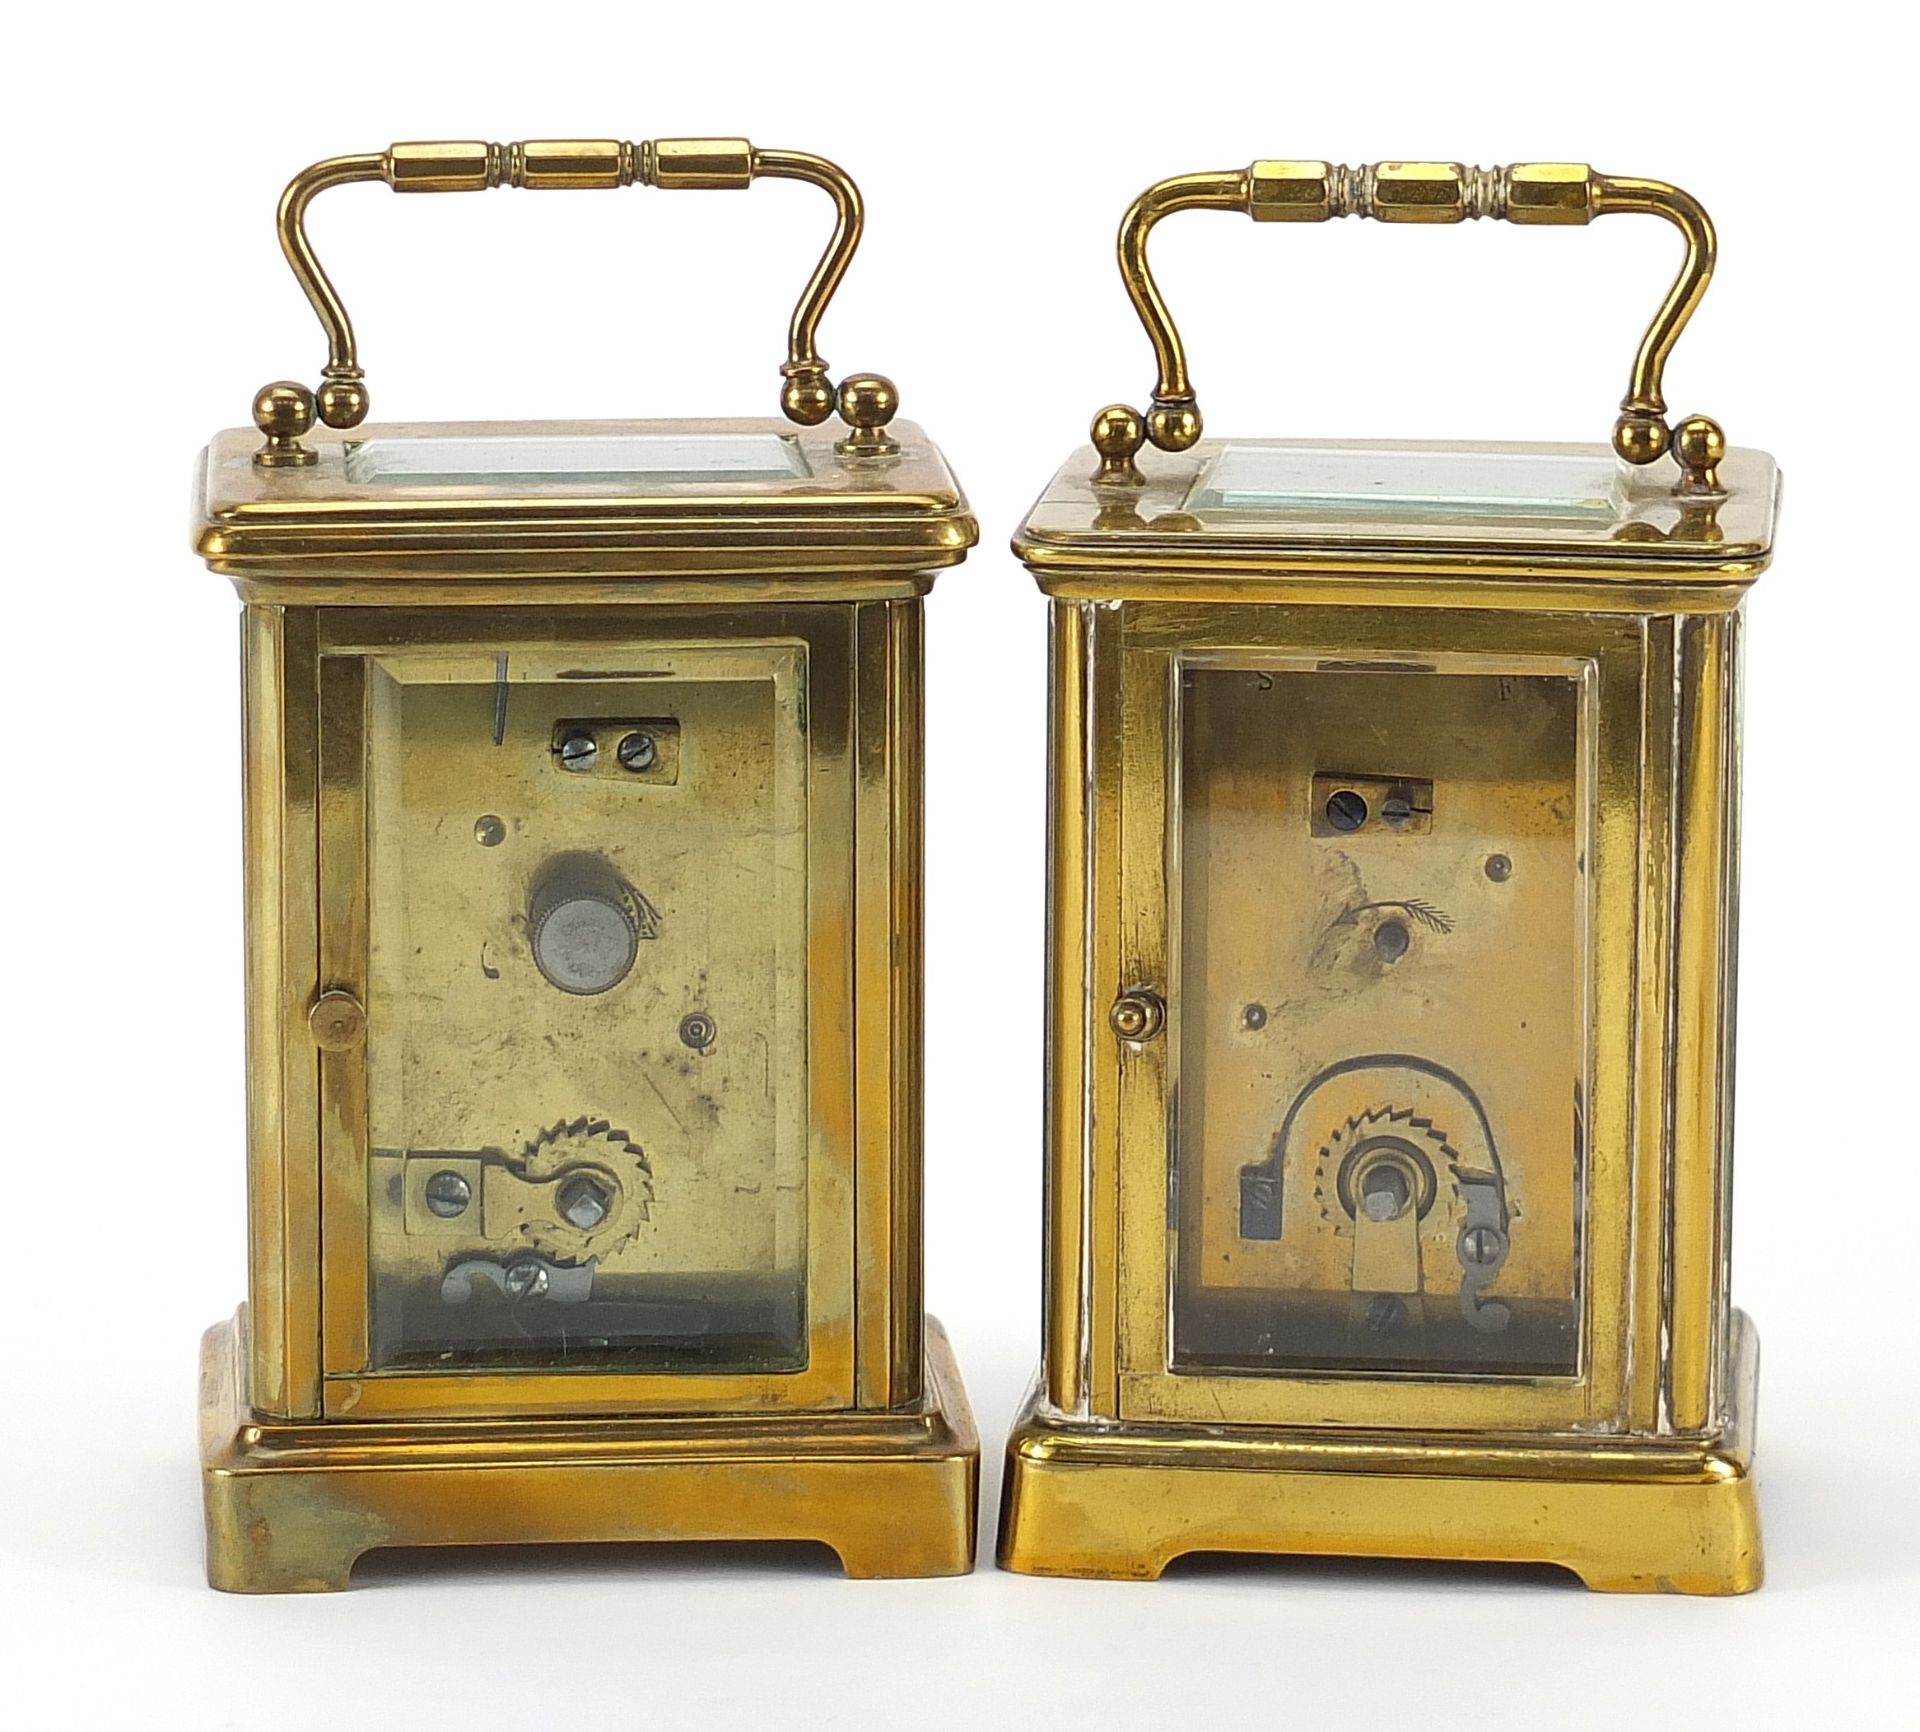 Two brass cased carriage clocks with enamel dials, each approximately 11cm high Both clocks wind and - Image 2 of 4